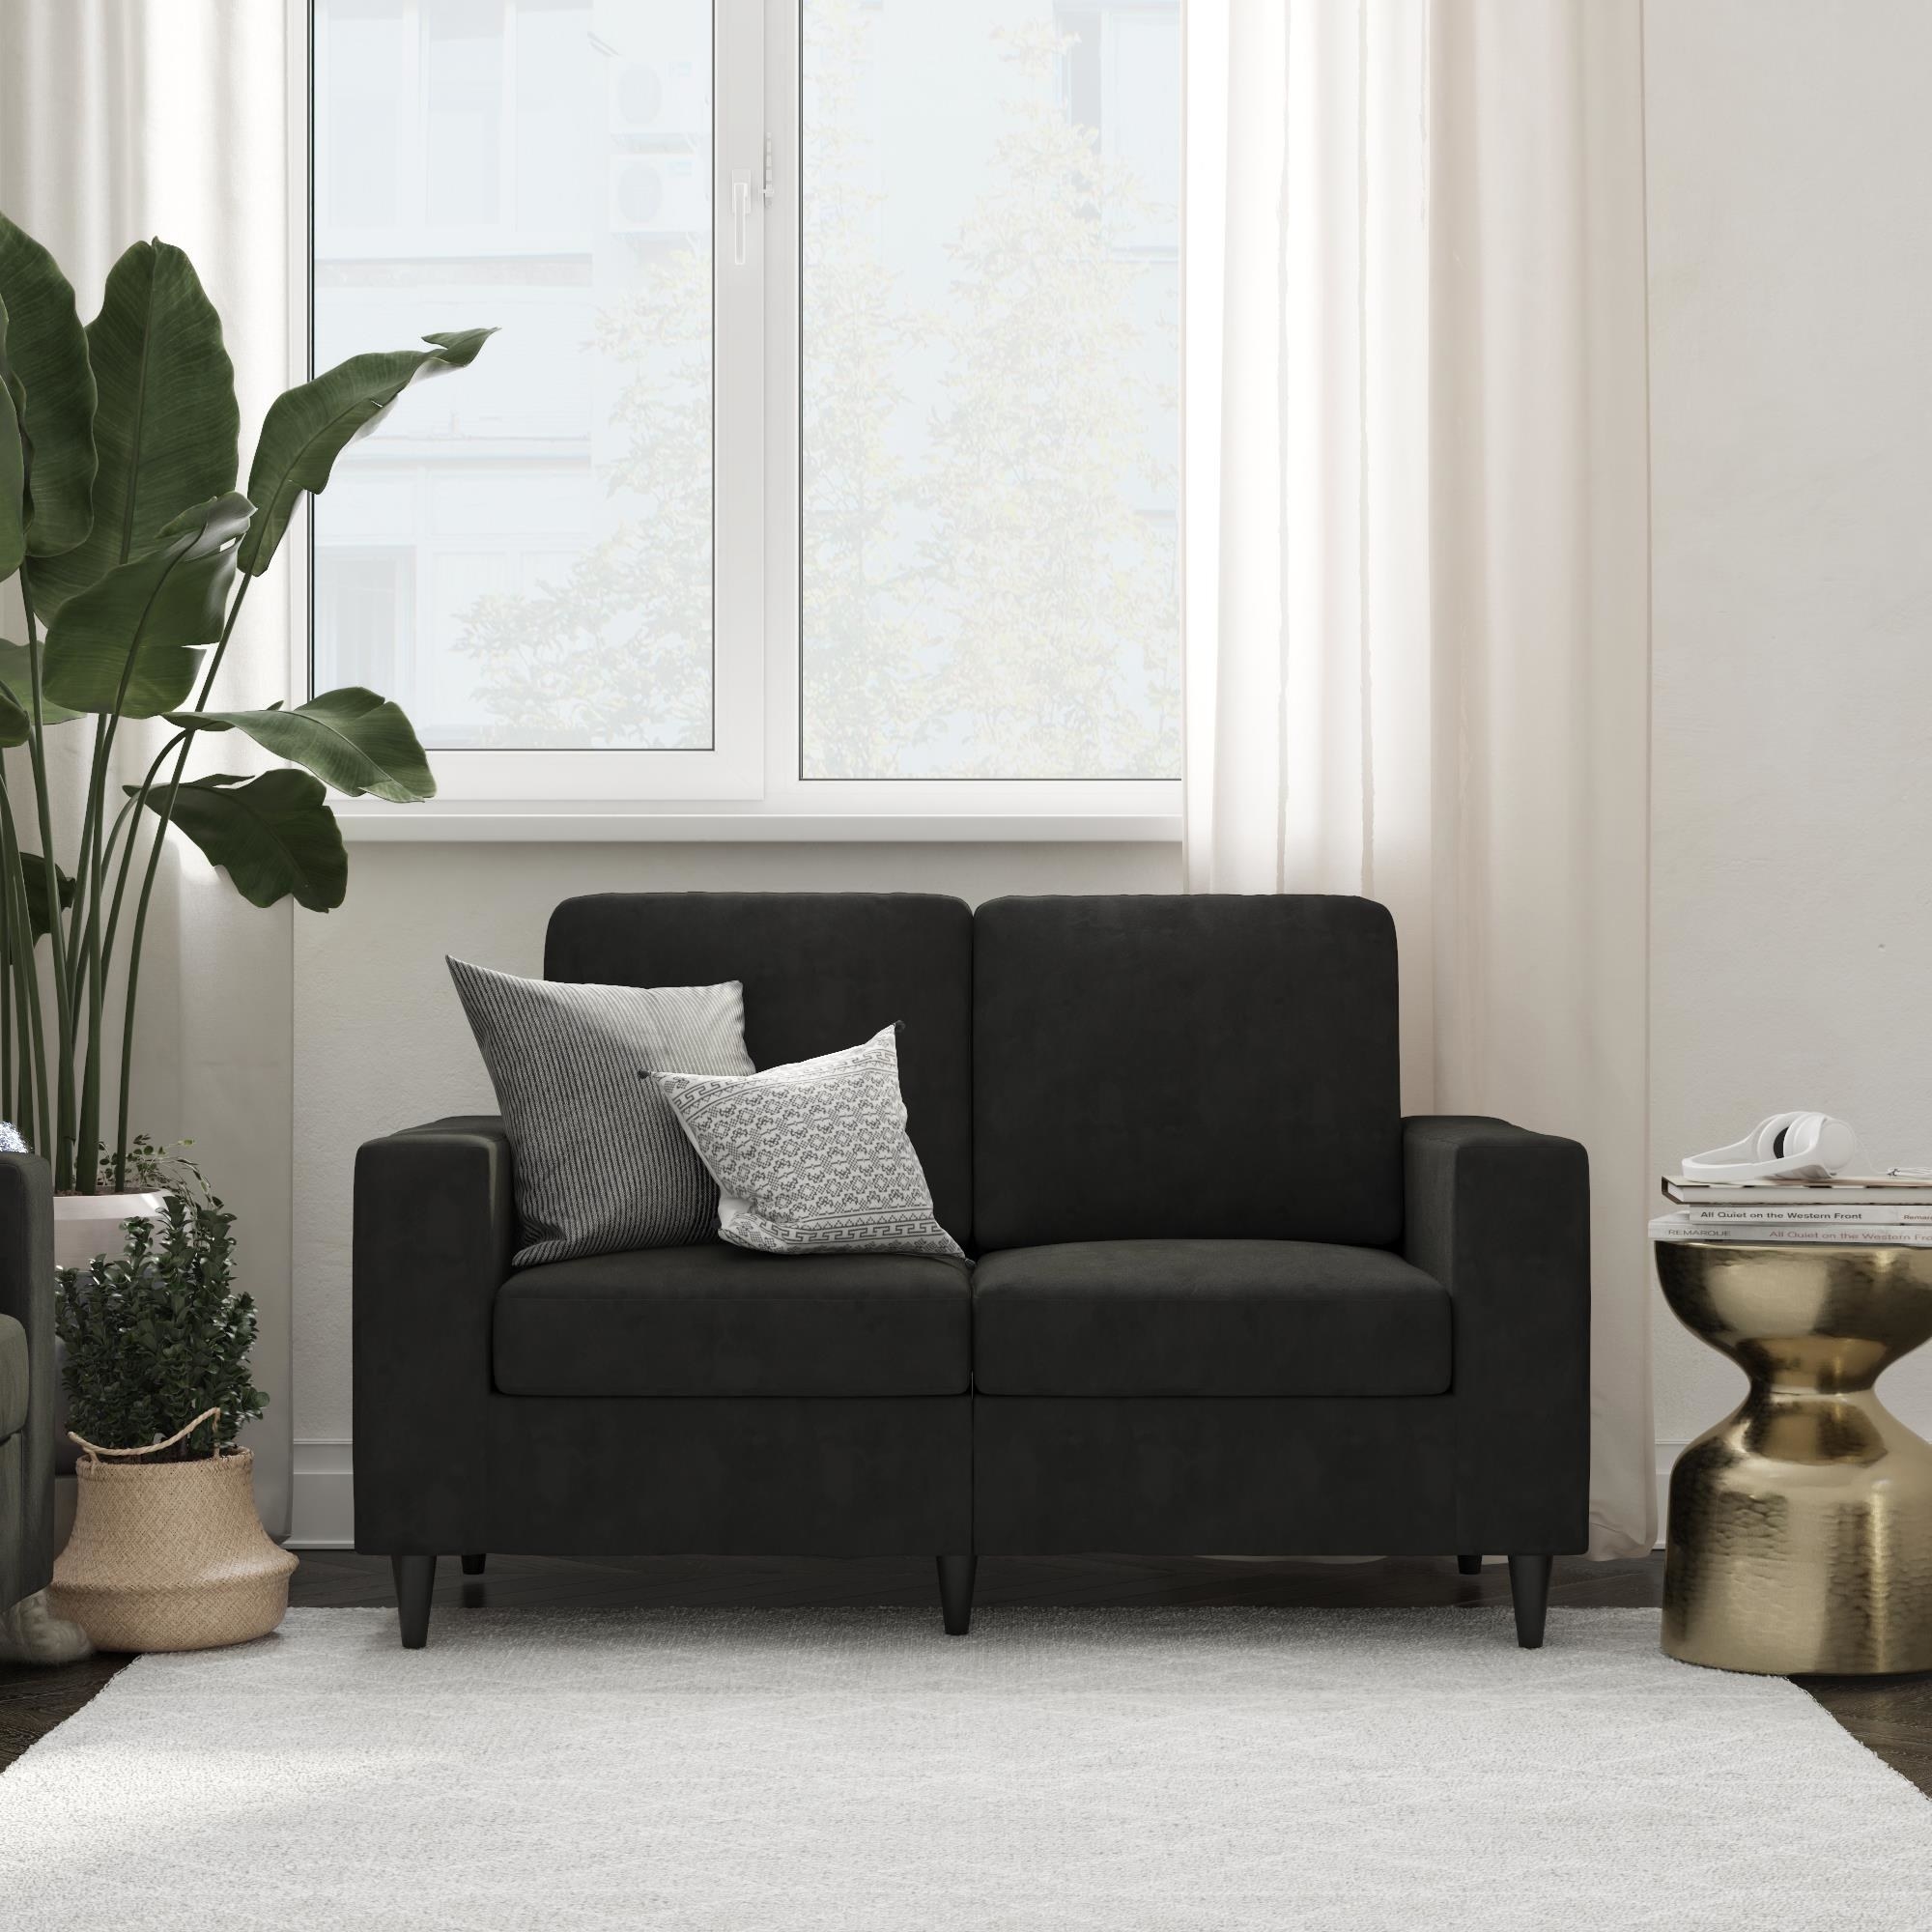 An image of a black loveseat with a sturdy wooden frame, pocket coiled seats, and solid wood legs